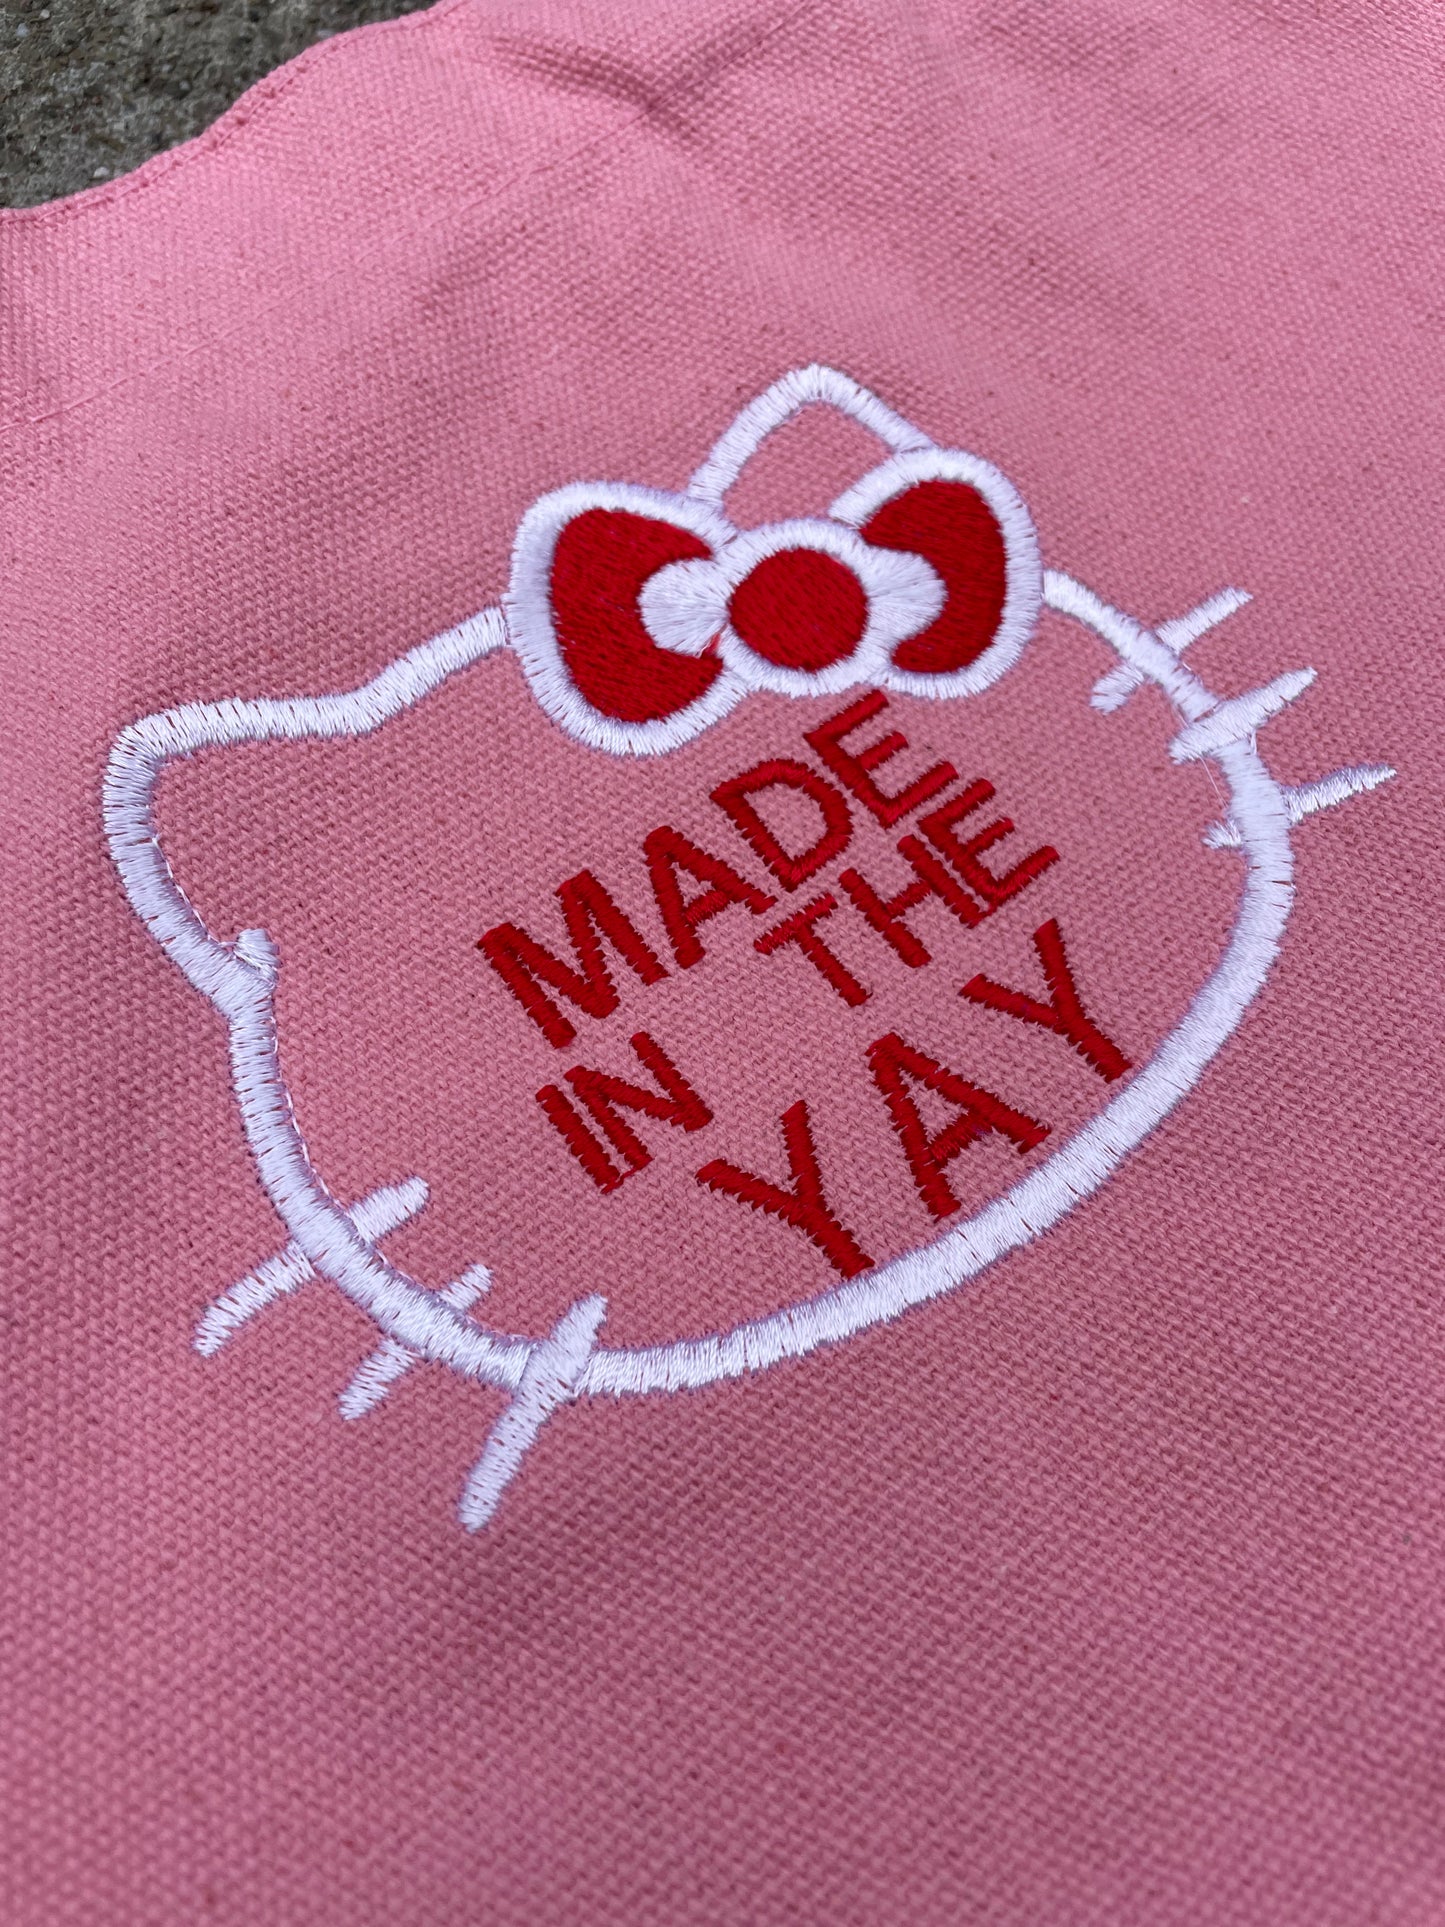 HK Made In The Yay Mini Pink Tote